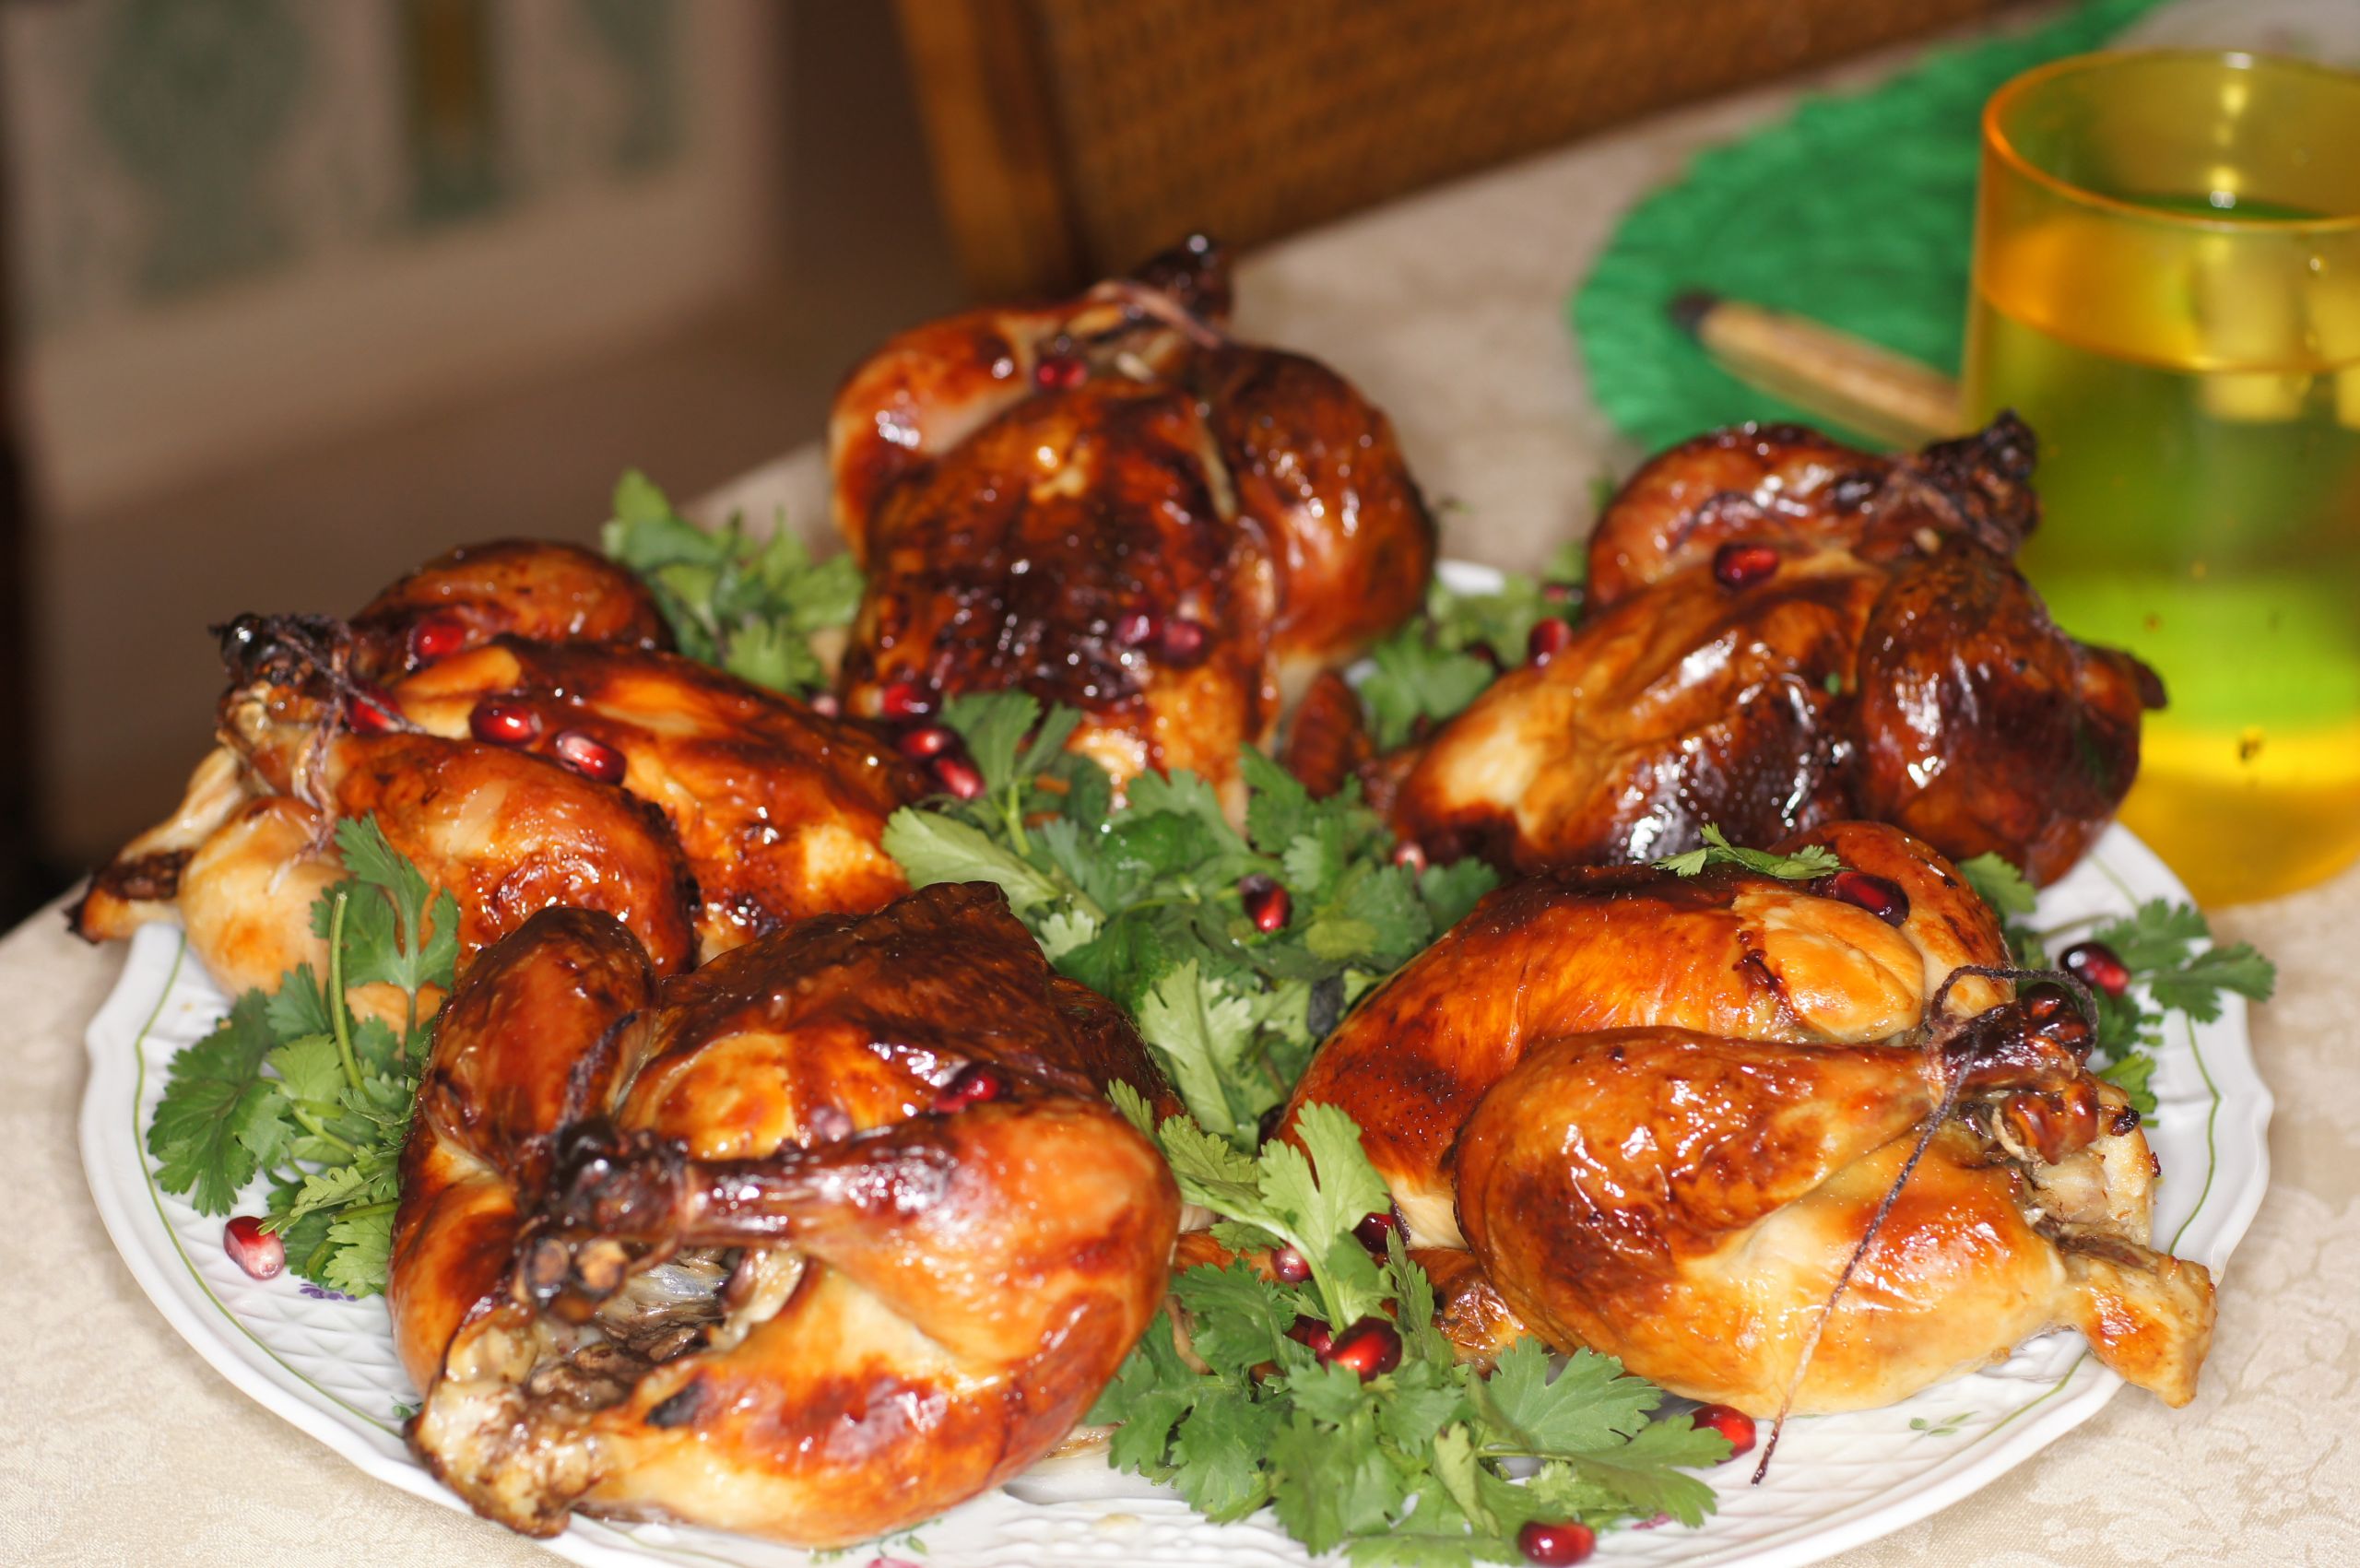 Recipes Cornish Game Hens
 Roasted Brined Cornish Game Hens with Pomegranate Sauce